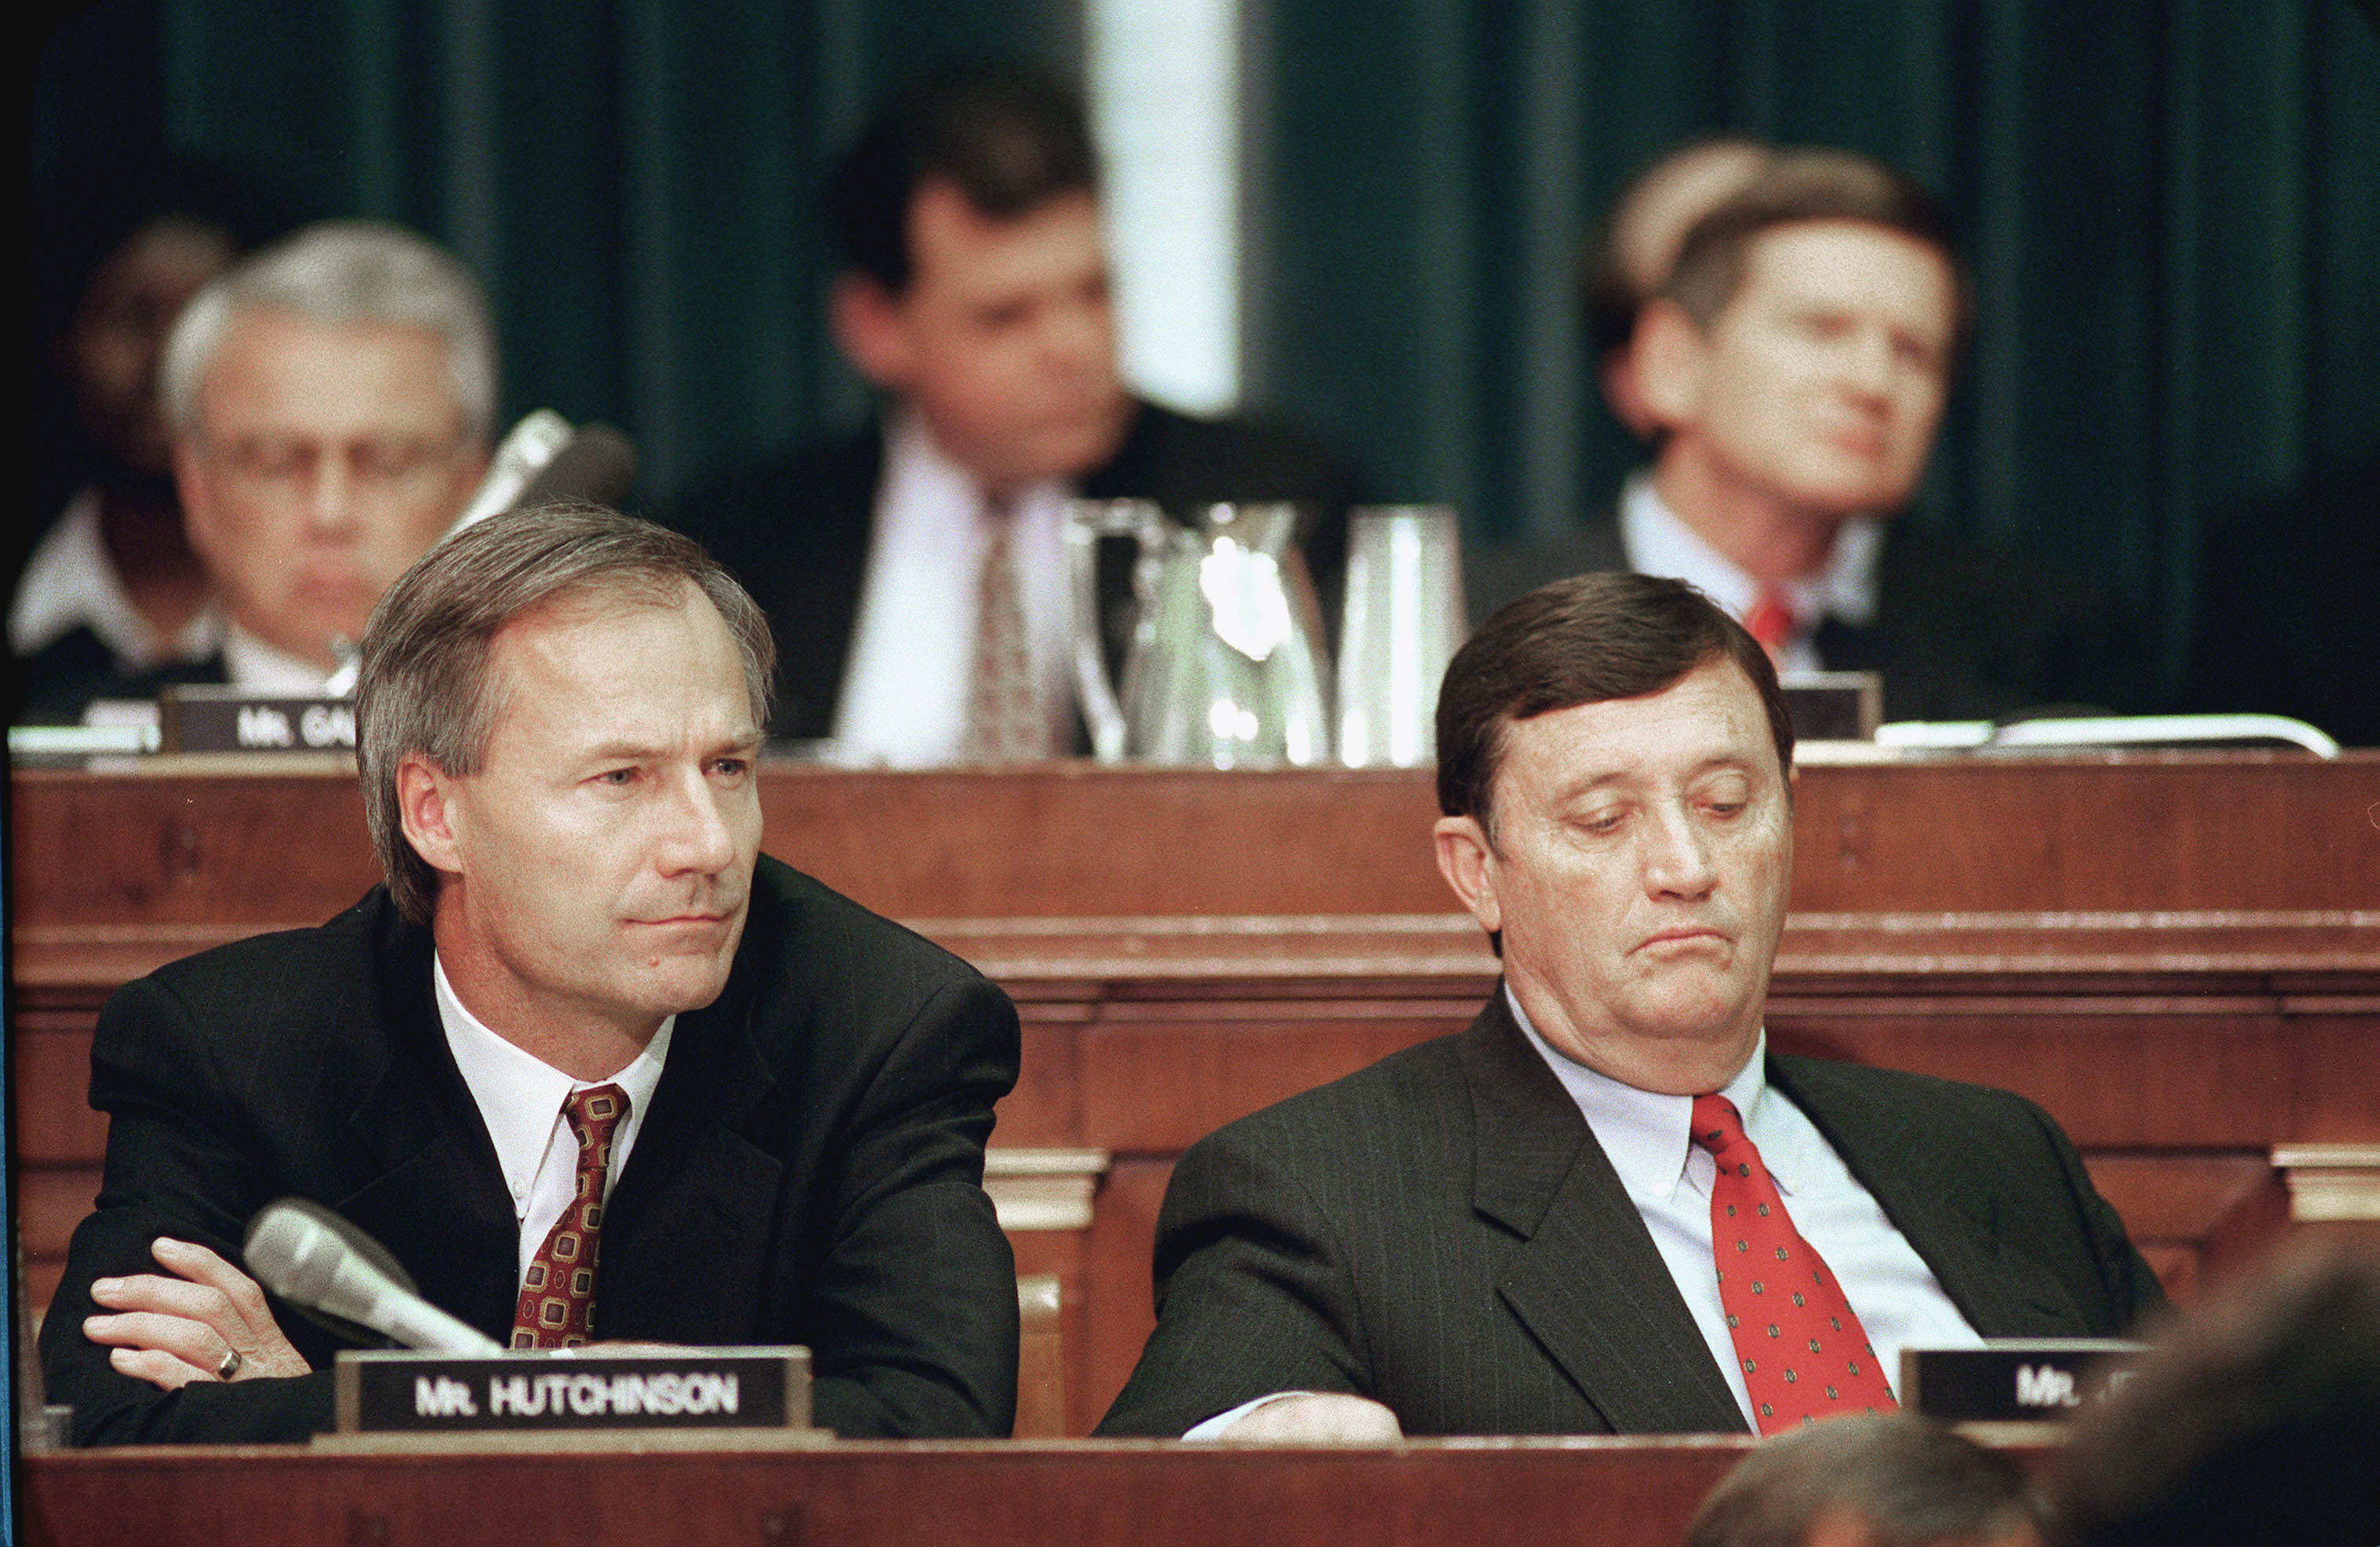 Asa Hutchinson,R-Ark., and Bill Jenkins,R-Tenn.,listen to Independent Counsel Kenneth Starr opening statement before the House Judiciary Committee regarding articles of impeachment against President Bill Clinton.  ( Scott J. Ferrell--Congressional Quarterly/Getty Images) (Scott J. Ferrell—CQ-Roll Call,Inc.)